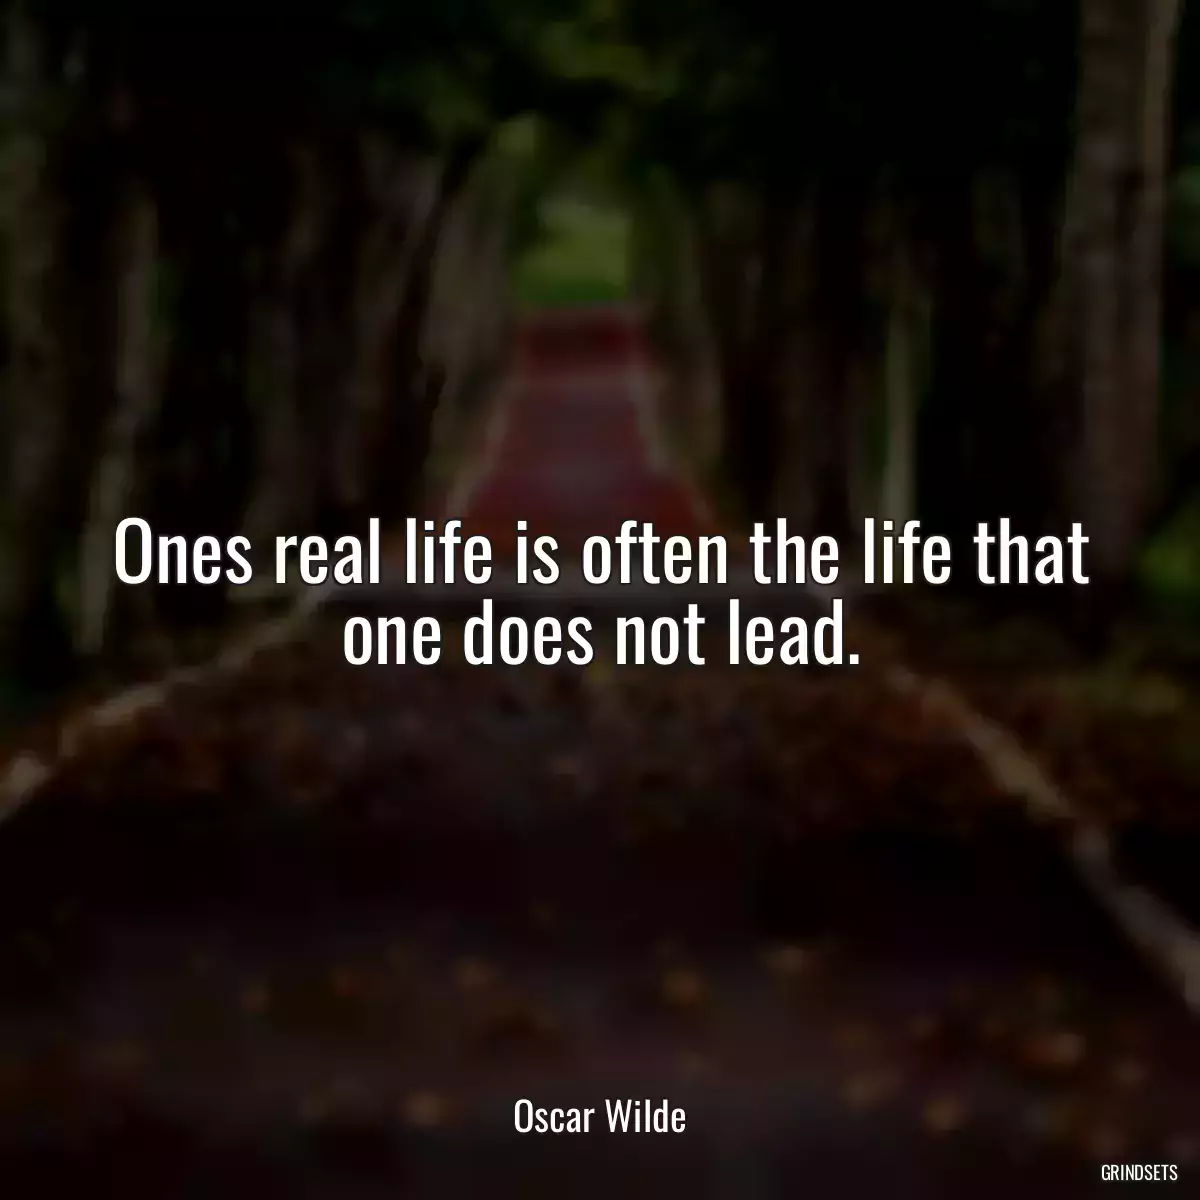 Ones real life is often the life that one does not lead.